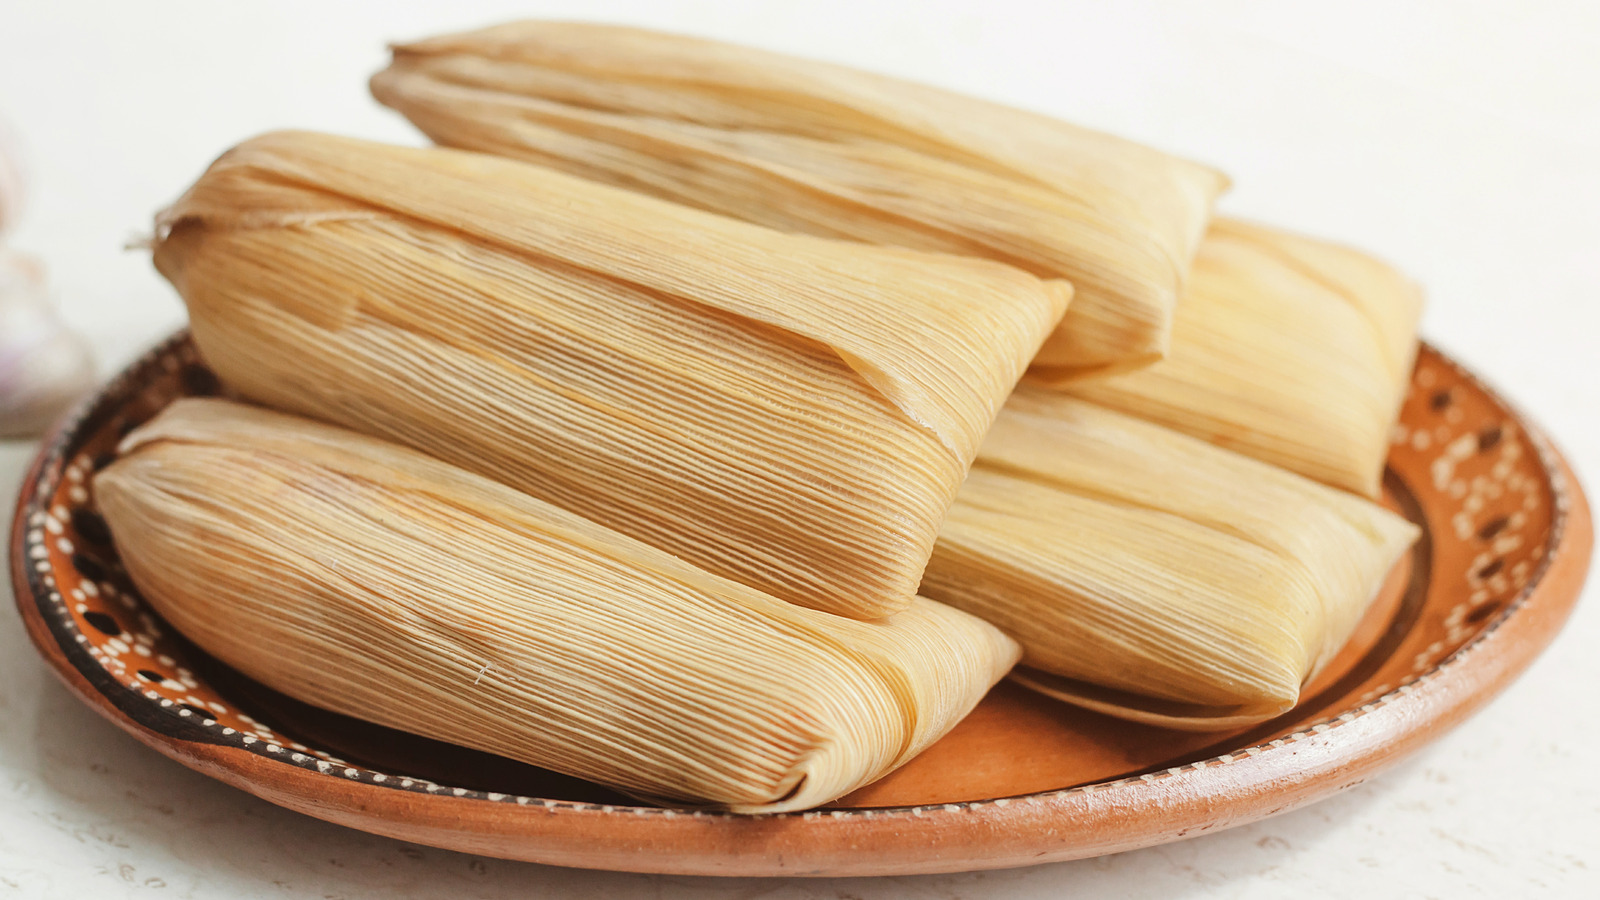 Del Taco Is Ready To Celebrate The Holidays With The Return Of Tamales